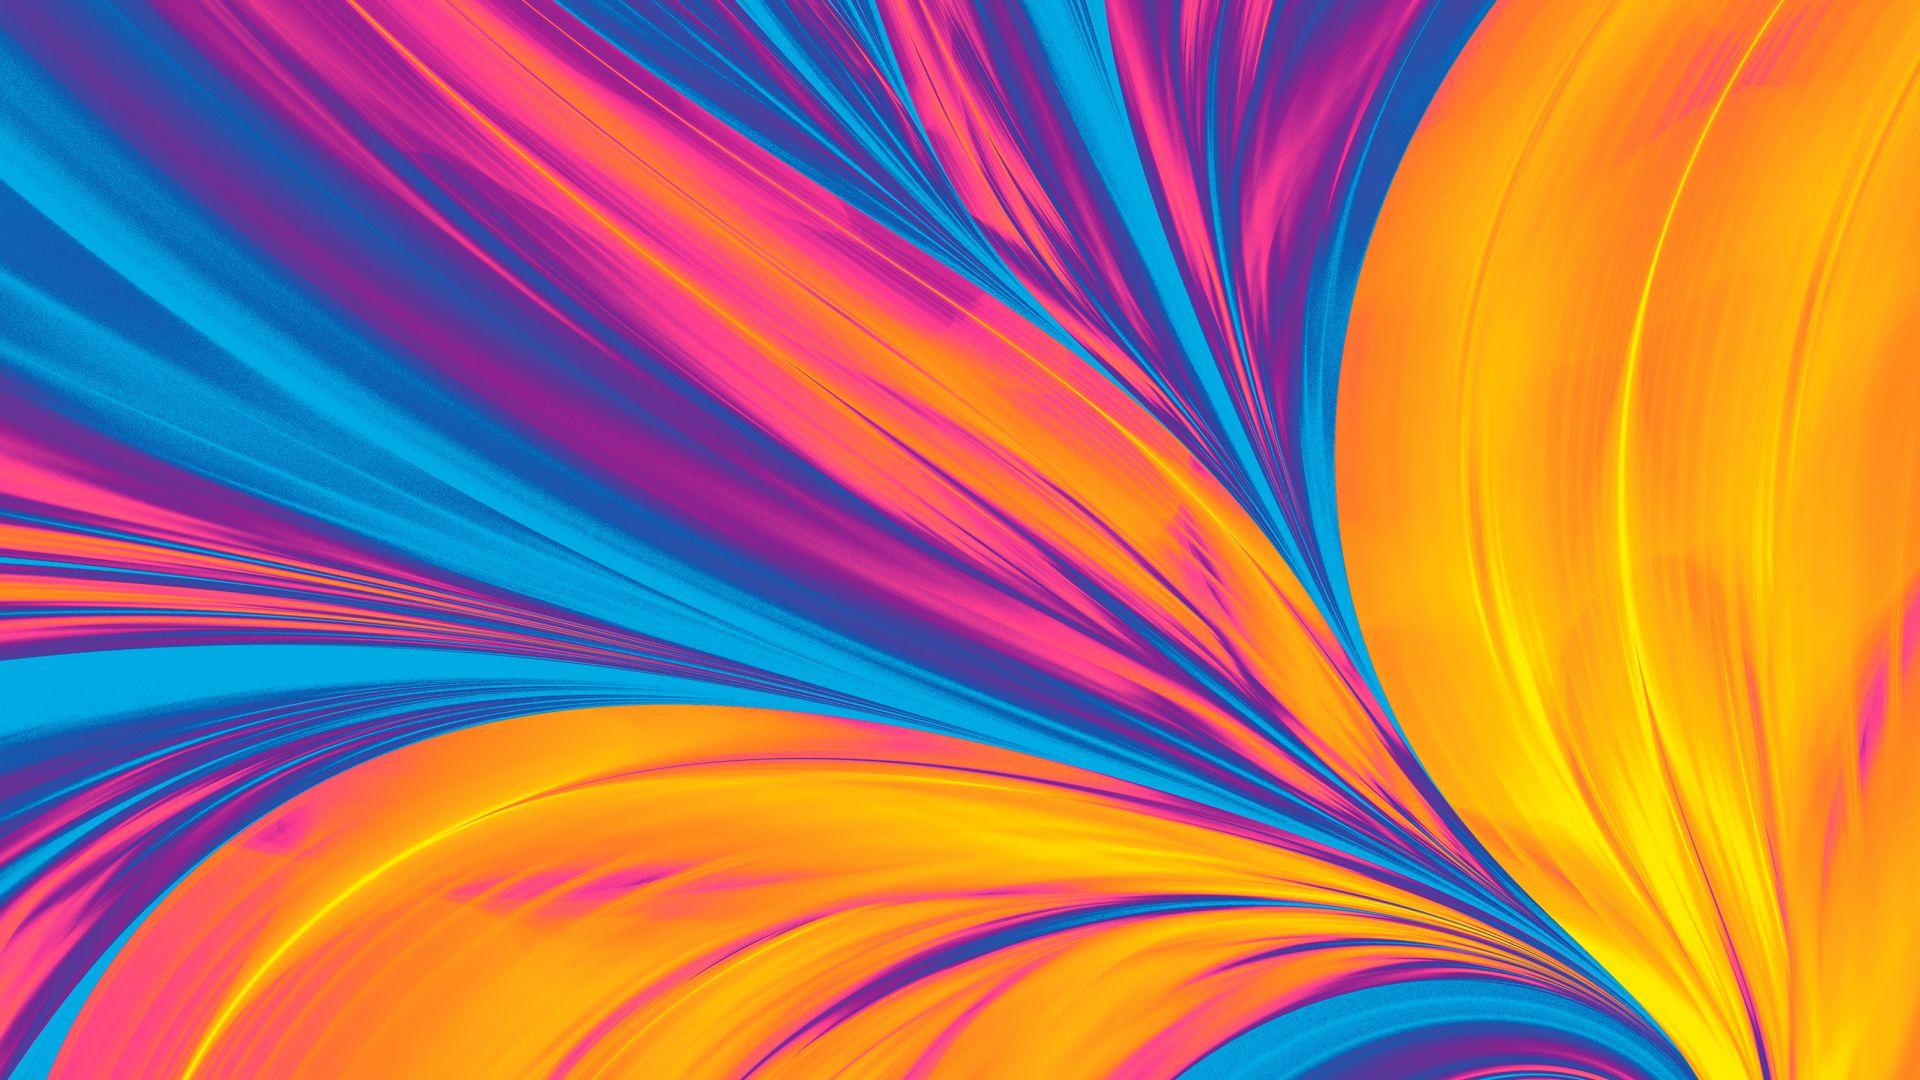 Download Huawei Matebook Pro 2019 abstract colorful 4K Wallpaper